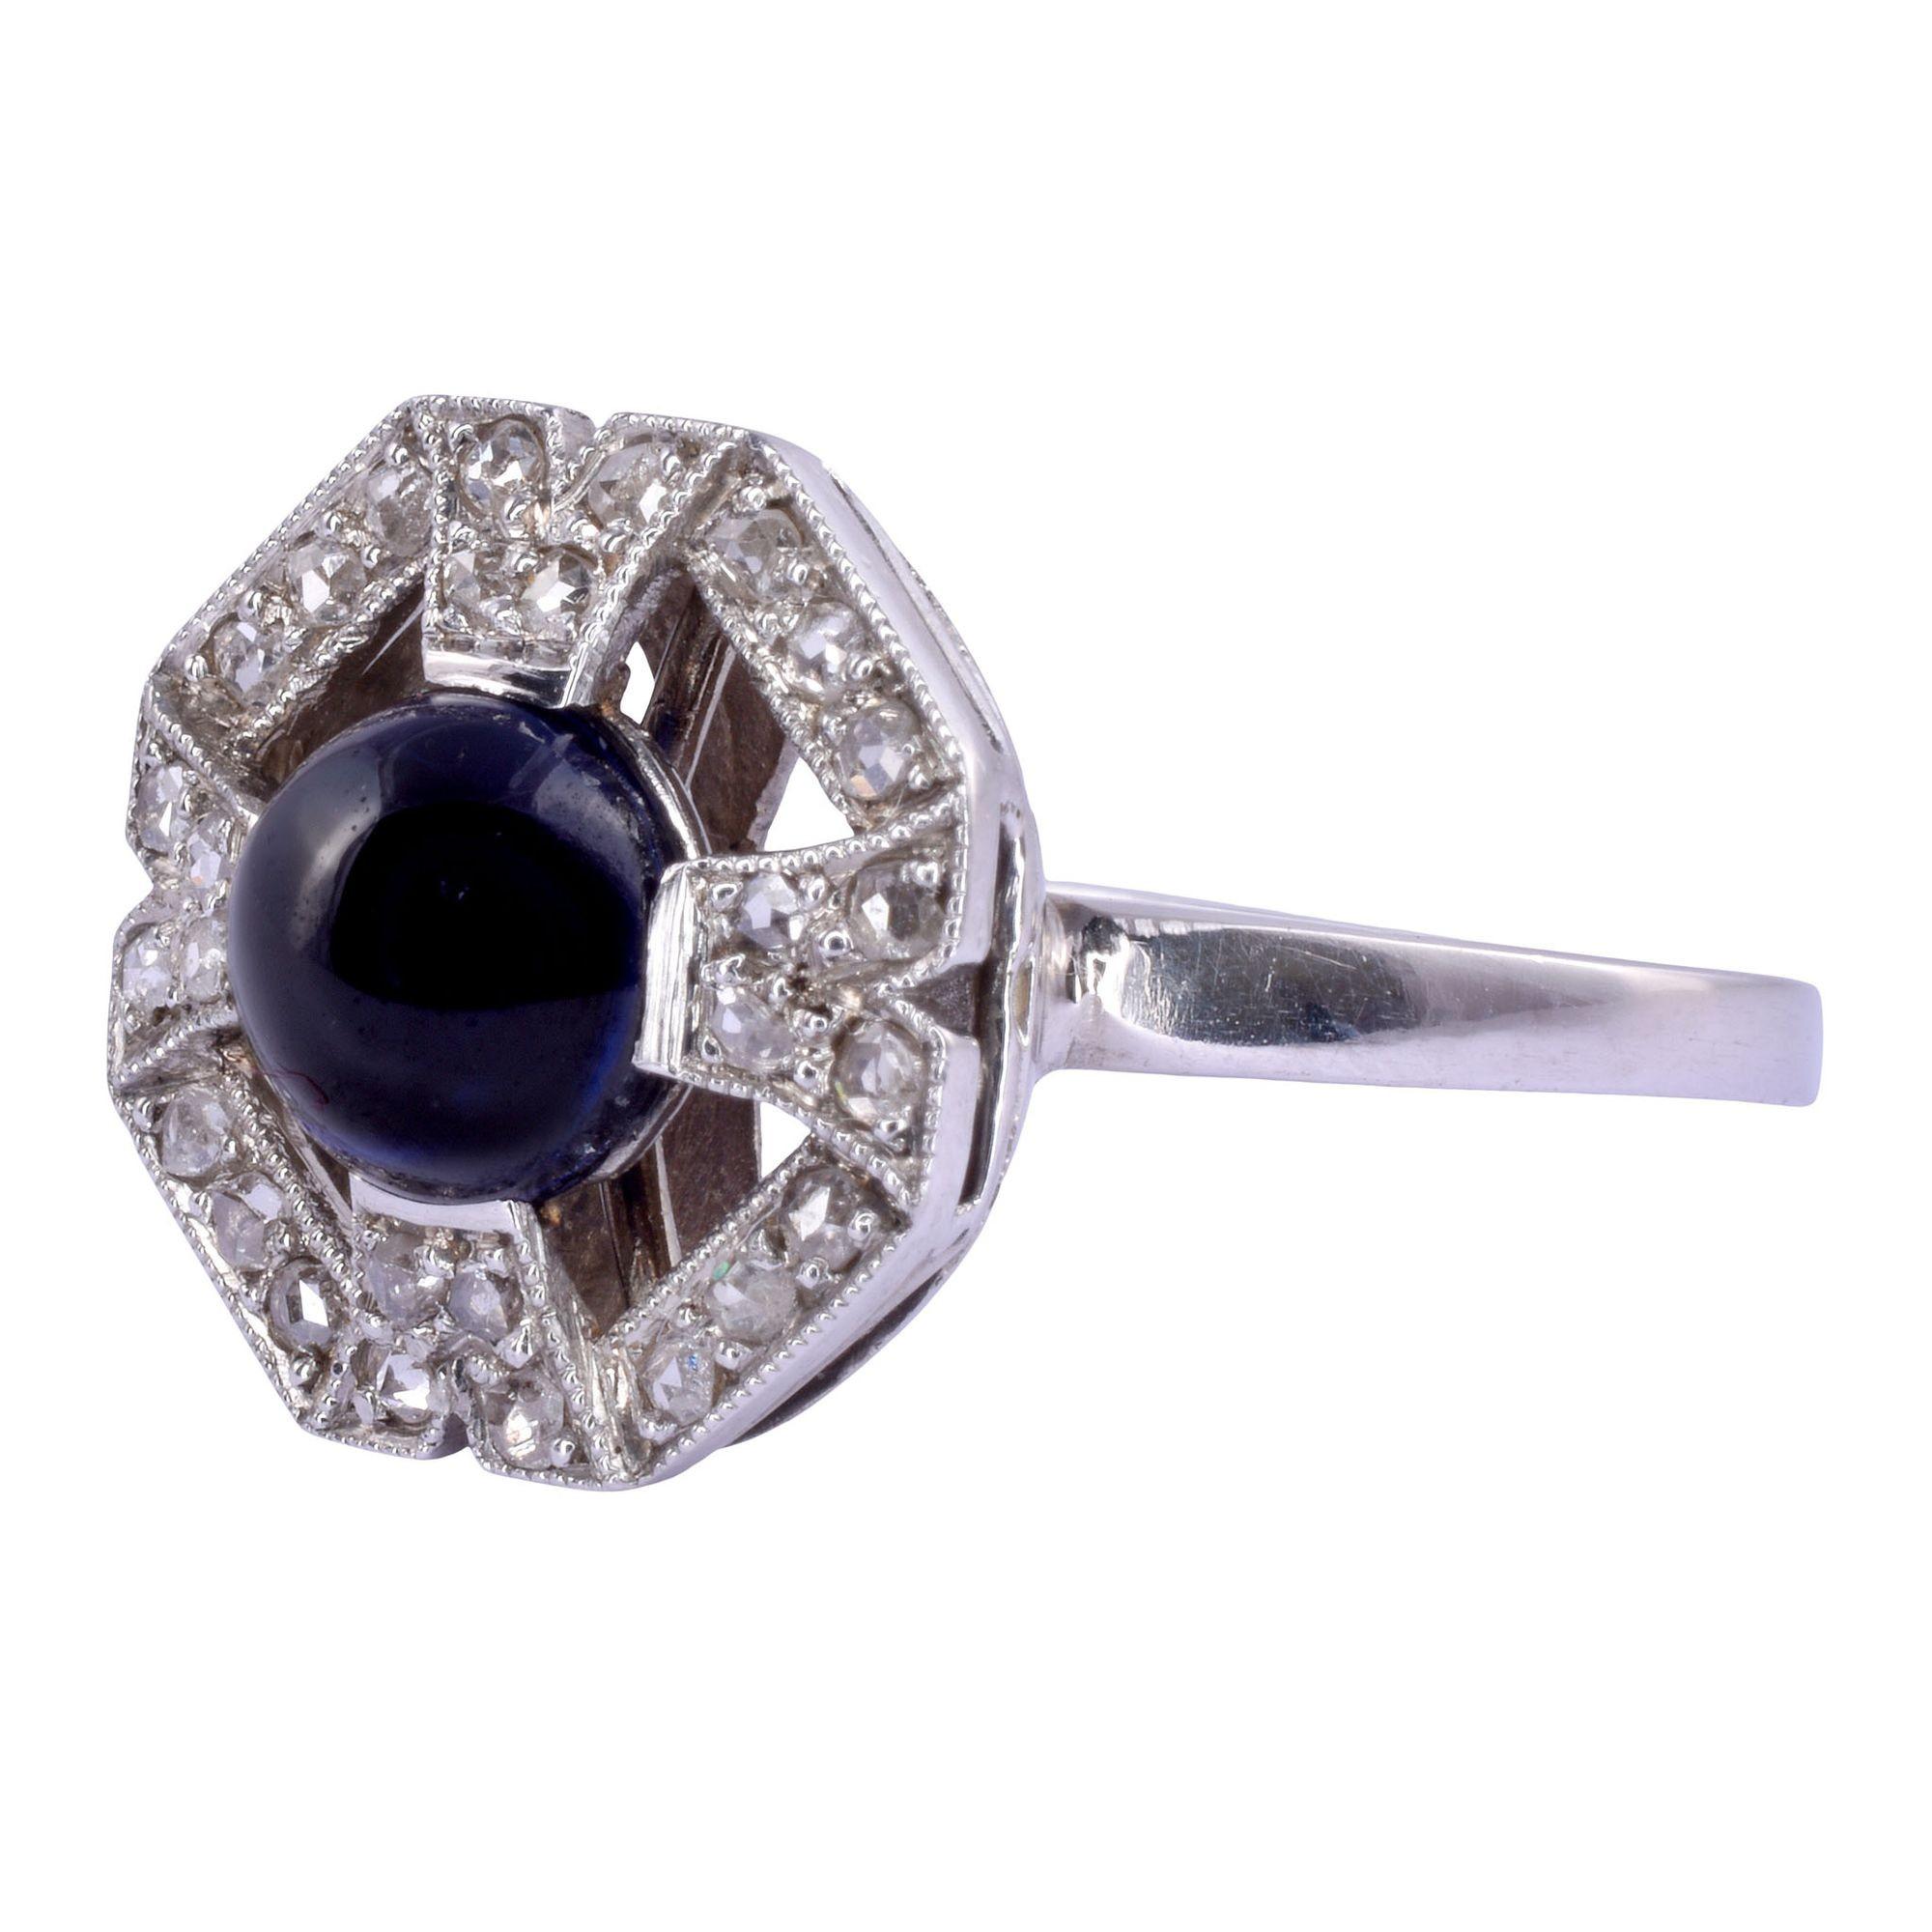 Antique Art Deco cabochon sapphire & diamond platinum ring, circa 1920. This Art Deco ring is crafted in platinum and features a cabochon sapphire at approximately 1.90 carats, note small chip at 2 o’clock position. There are 28 rose cut accent